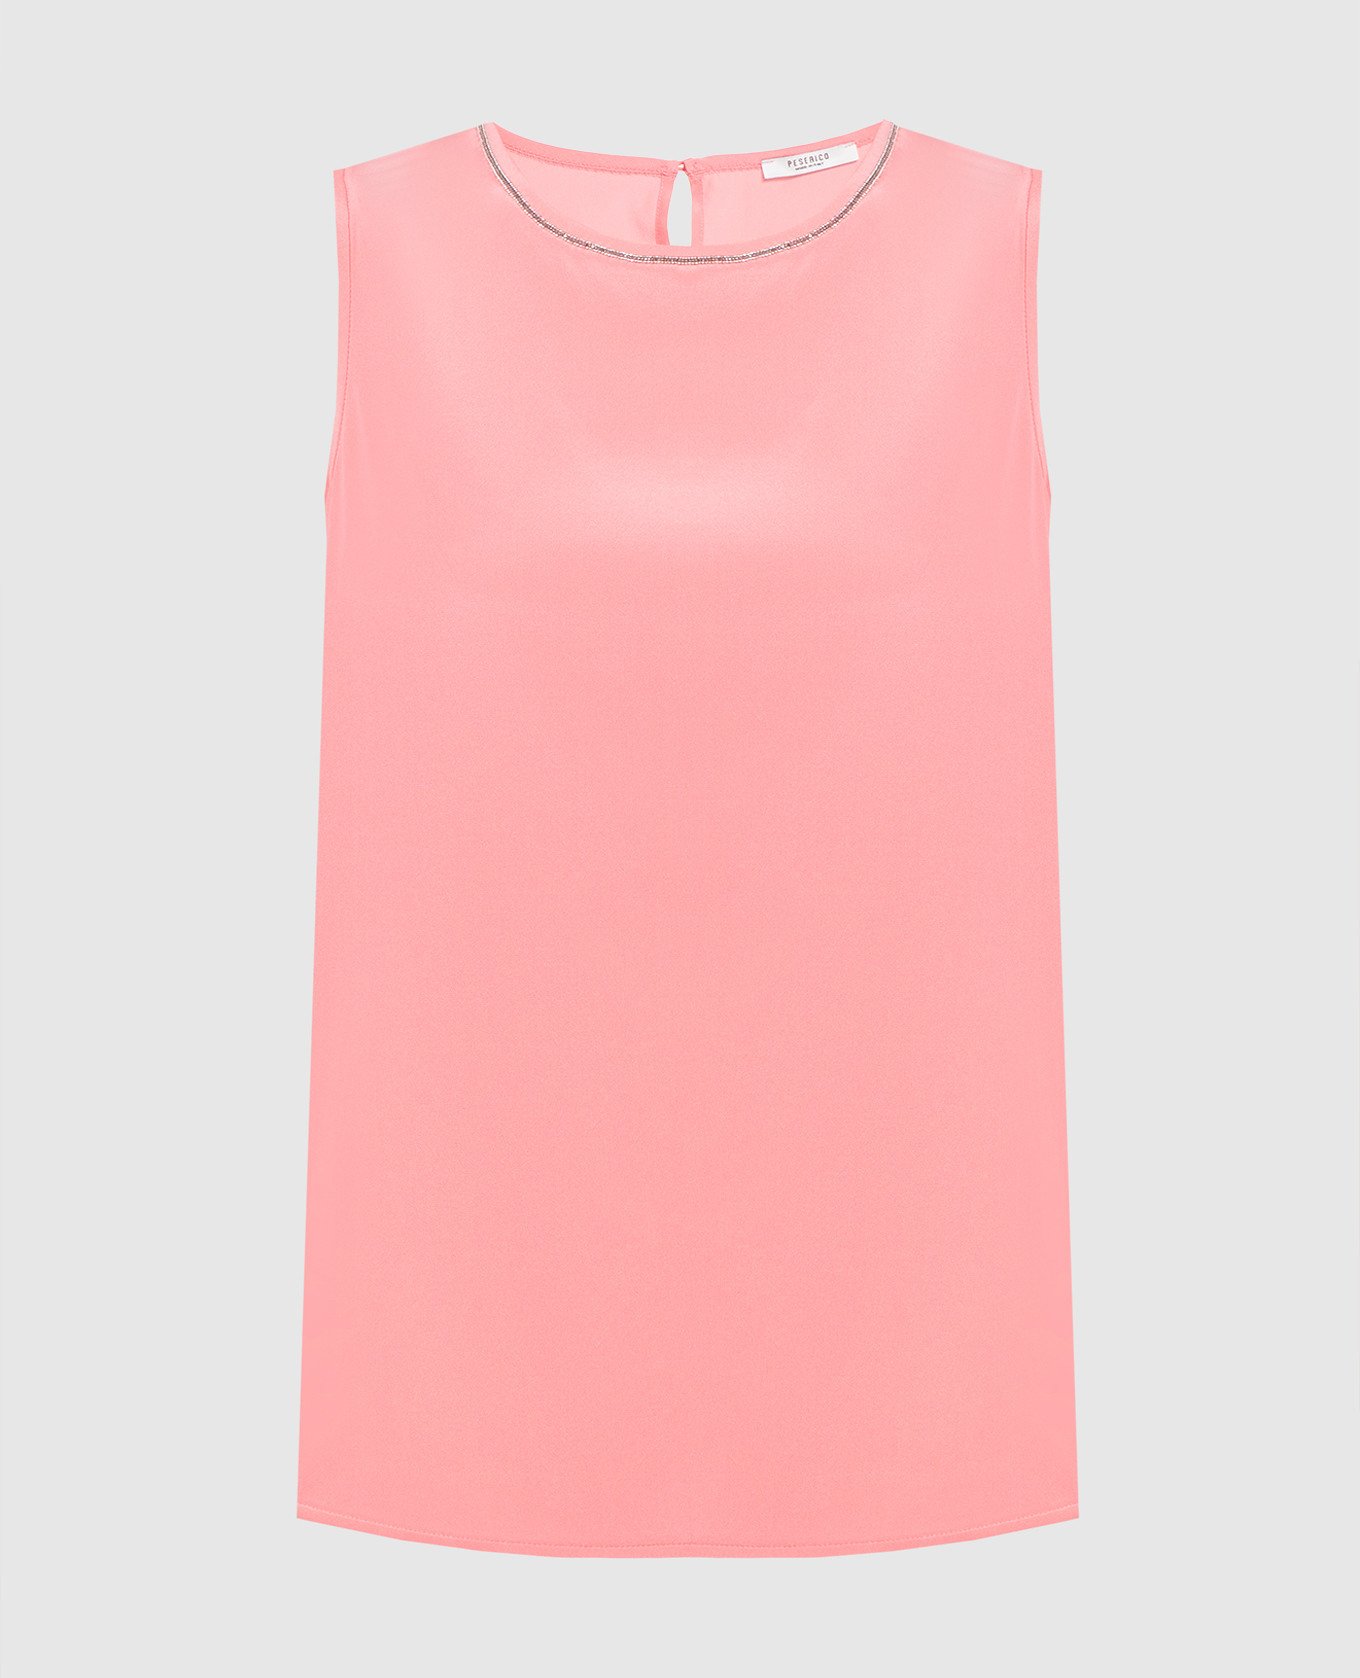 Pink silk top with monil chain